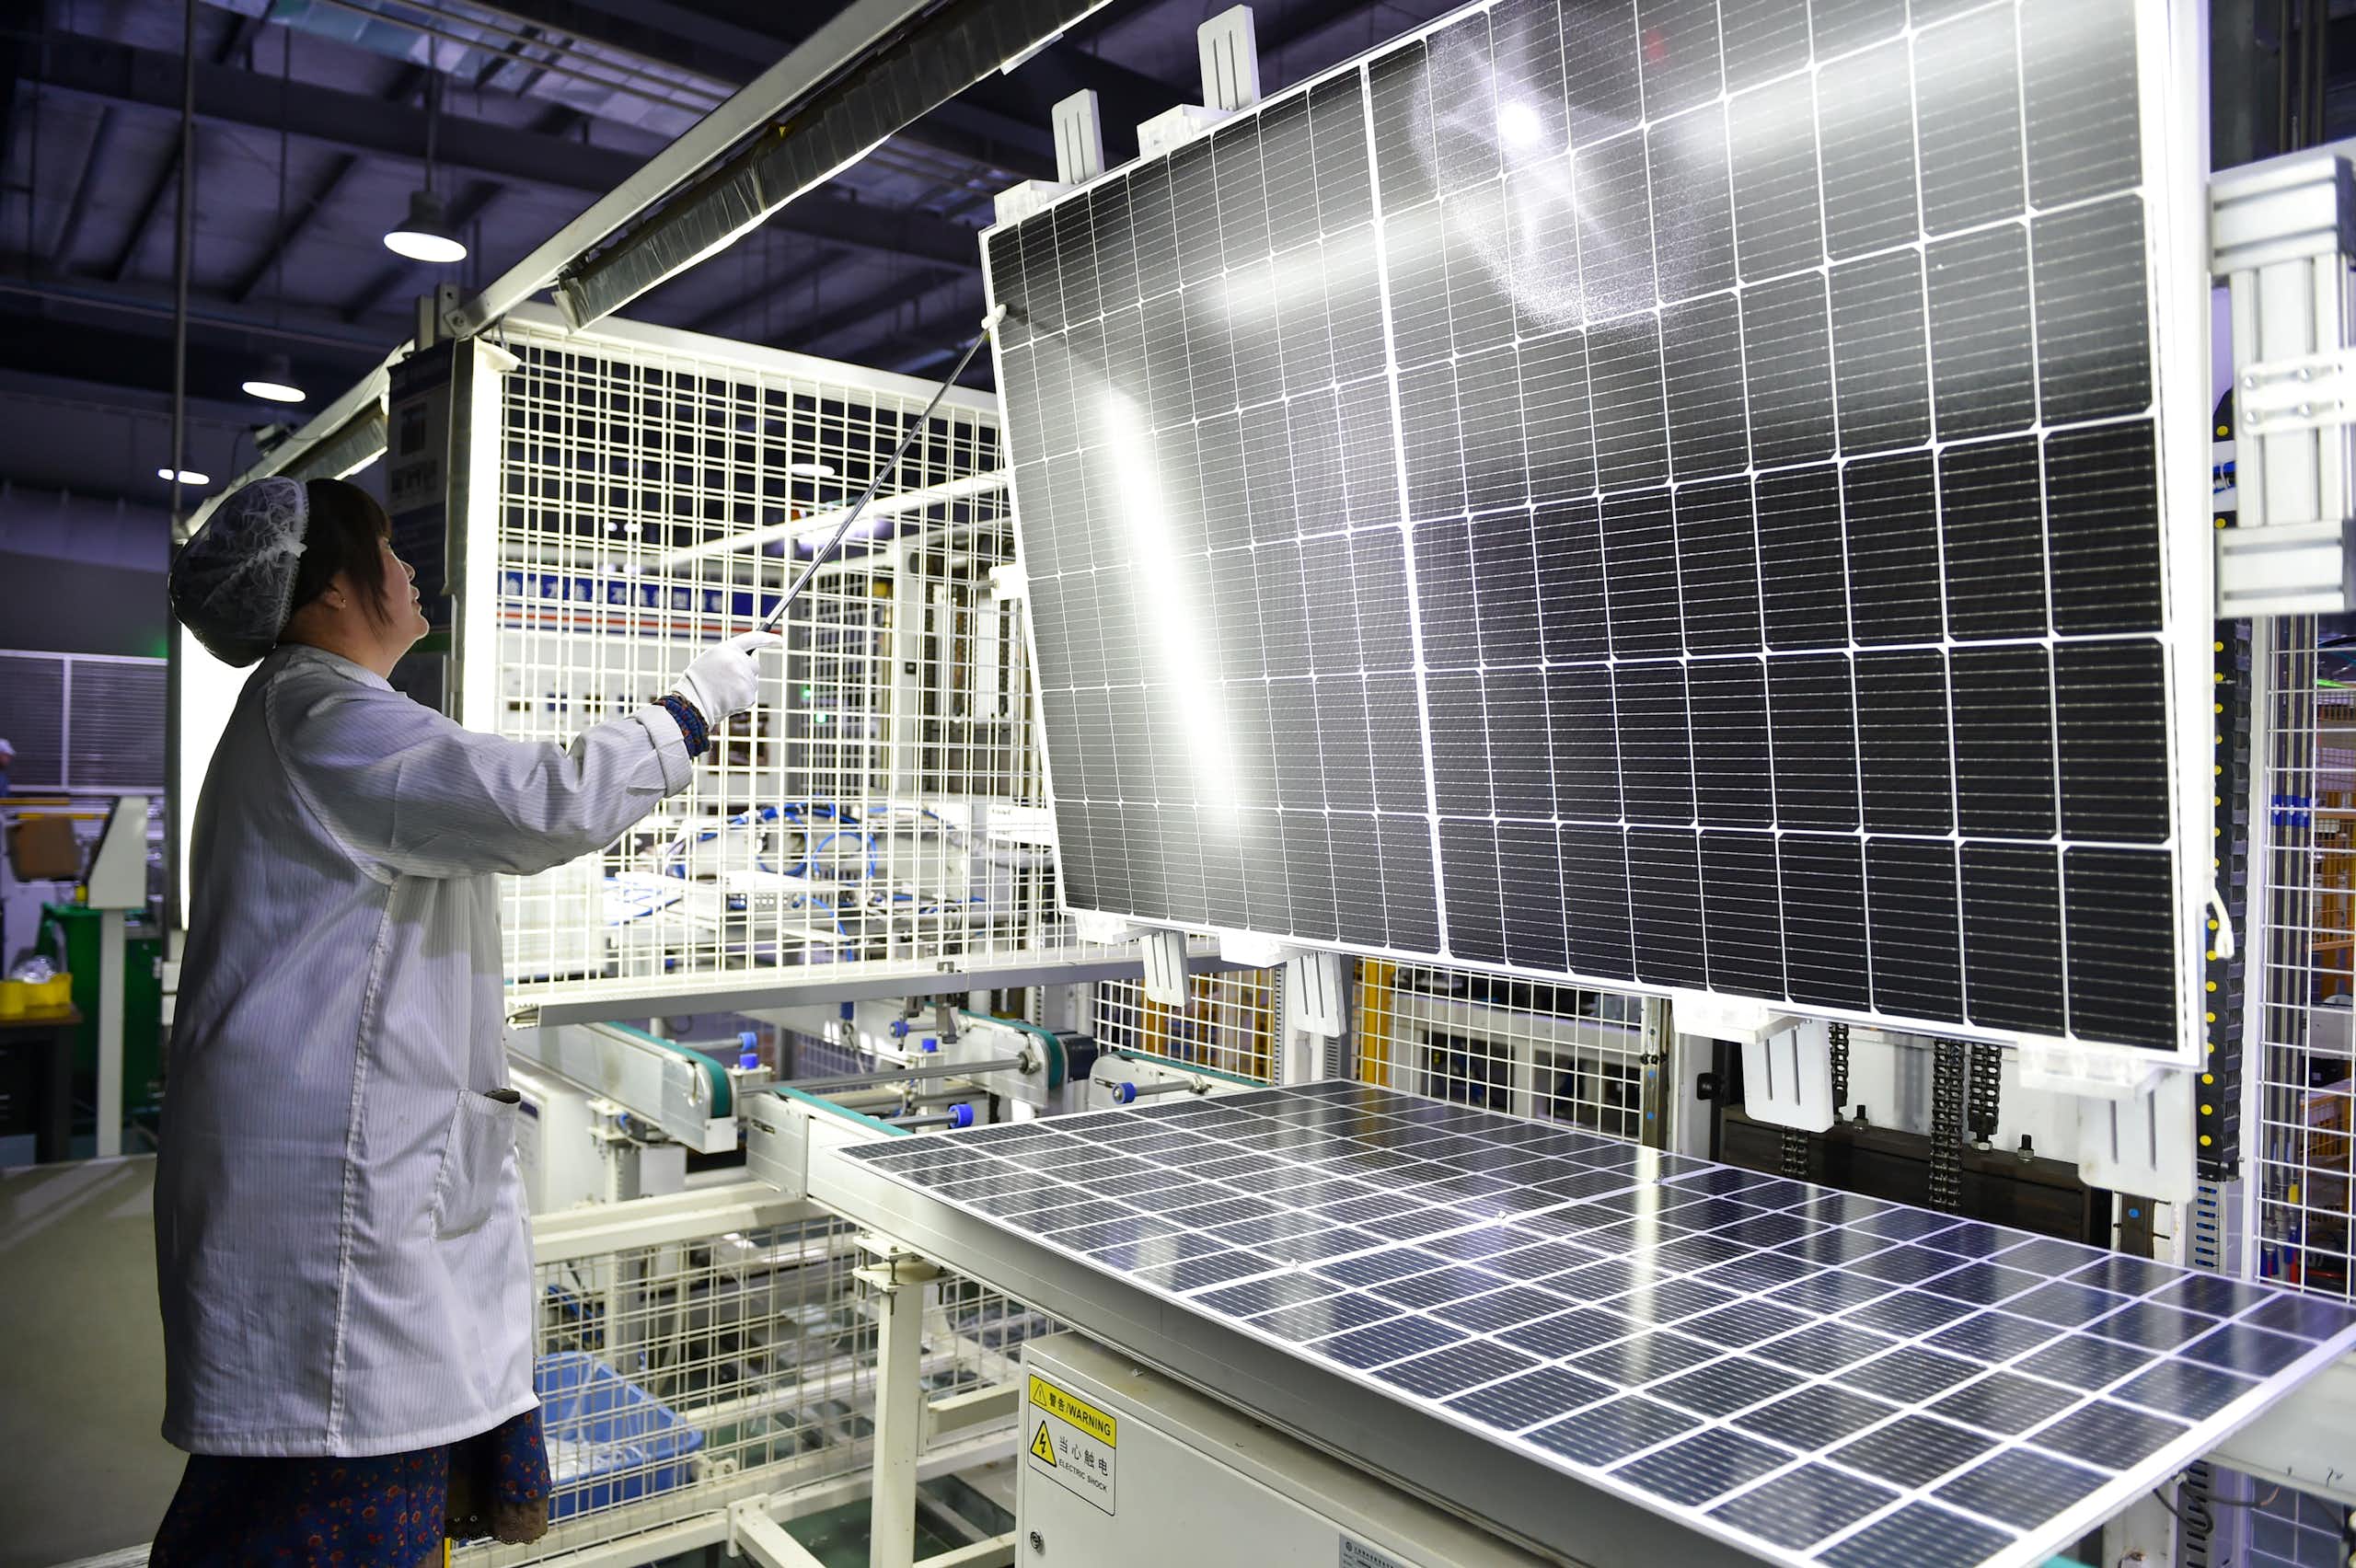 A woman worker wearing a white overall painstakingly assembles a solar energy panel in a high tech factory